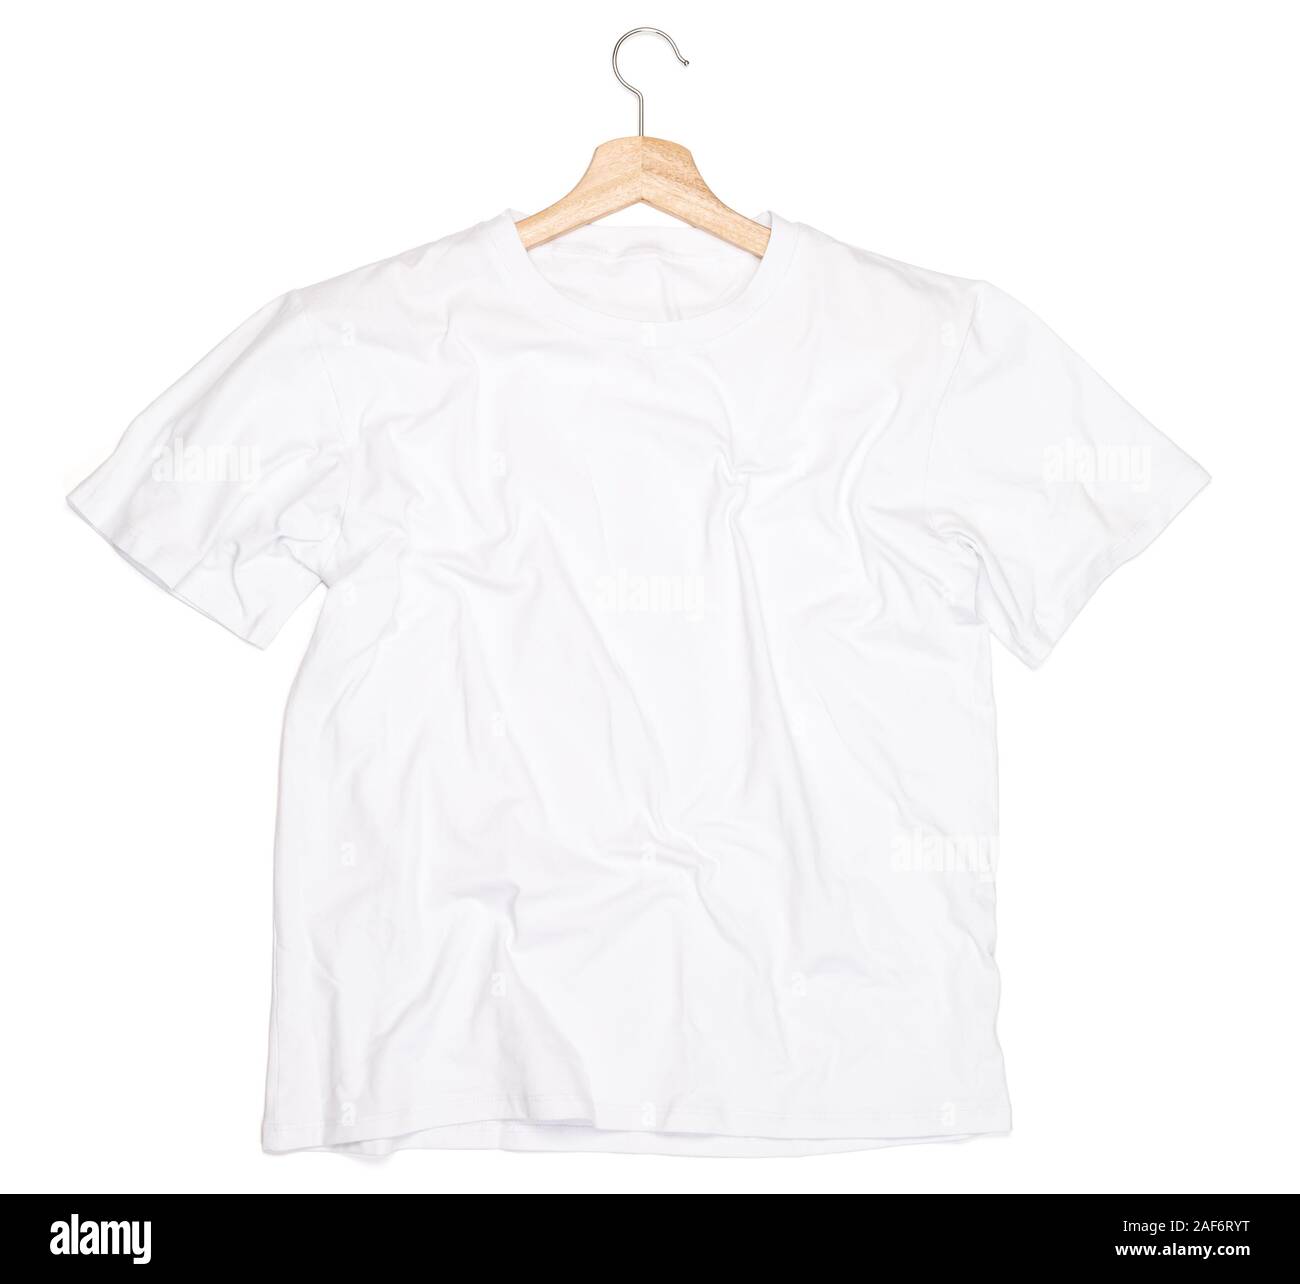 https://c8.alamy.com/comp/2AF6RYT/wrinkled-white-t-shirt-with-hanger-lay-on-a-white-background-isolated-2AF6RYT.jpg